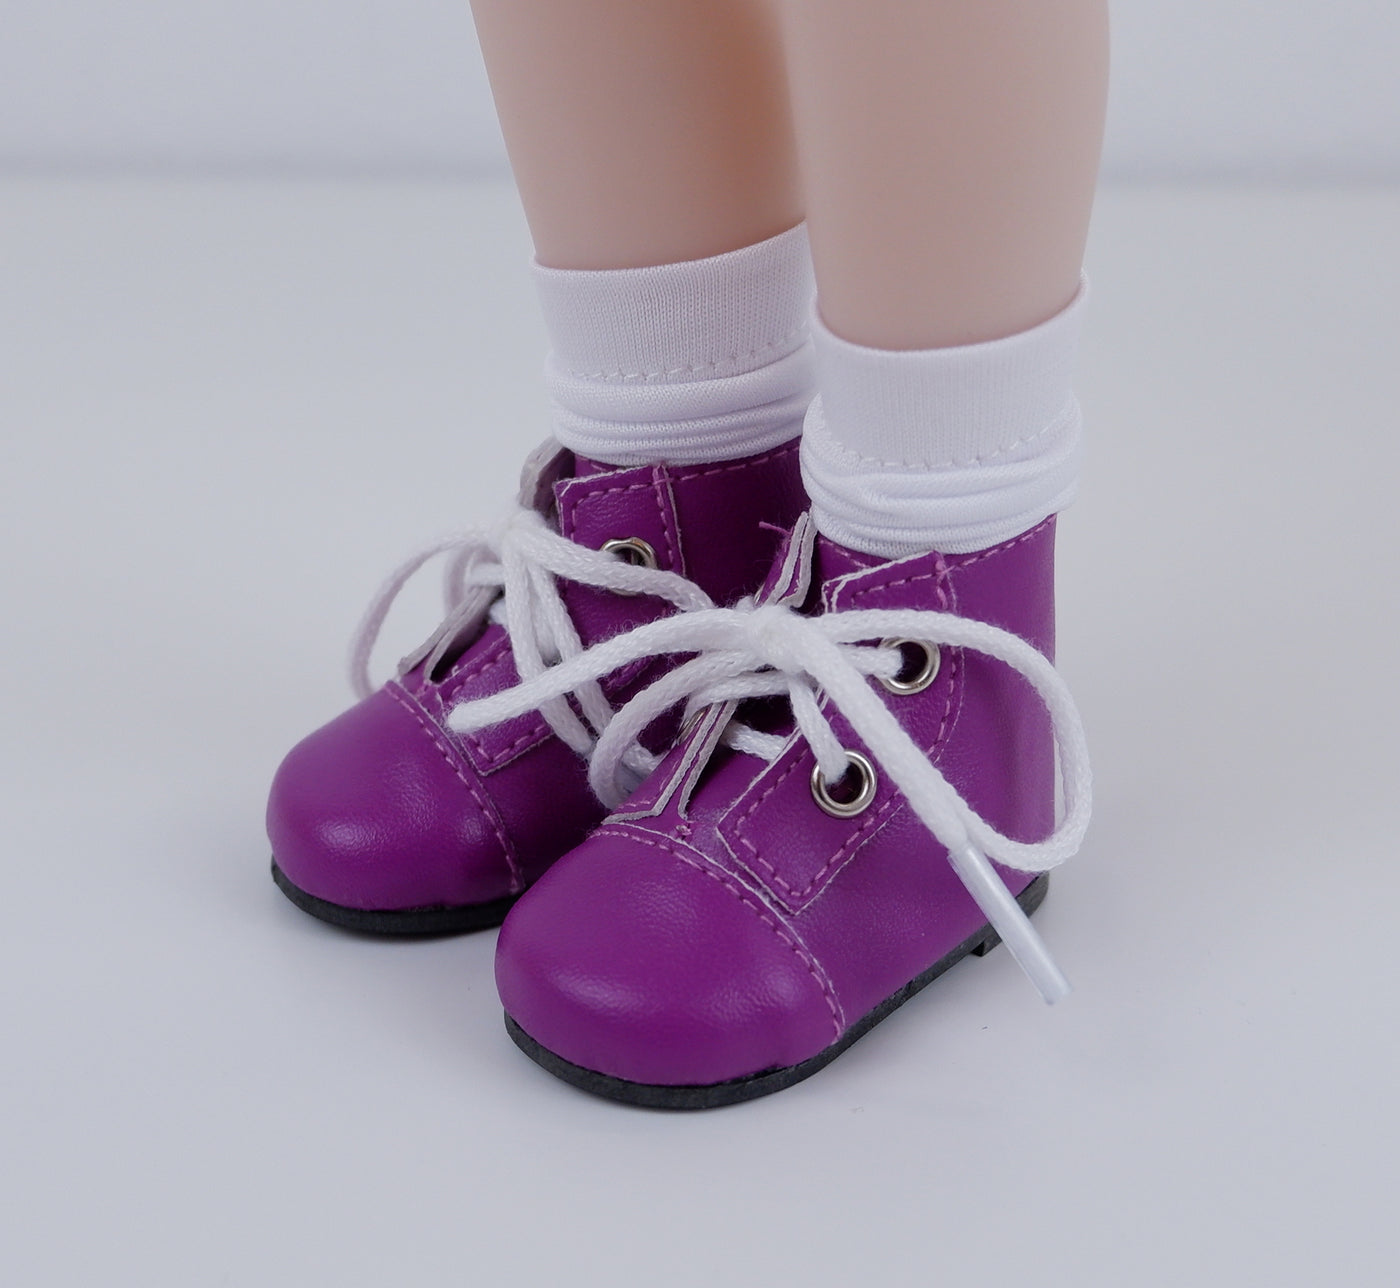 Ankle Lace Up Boots - Grape